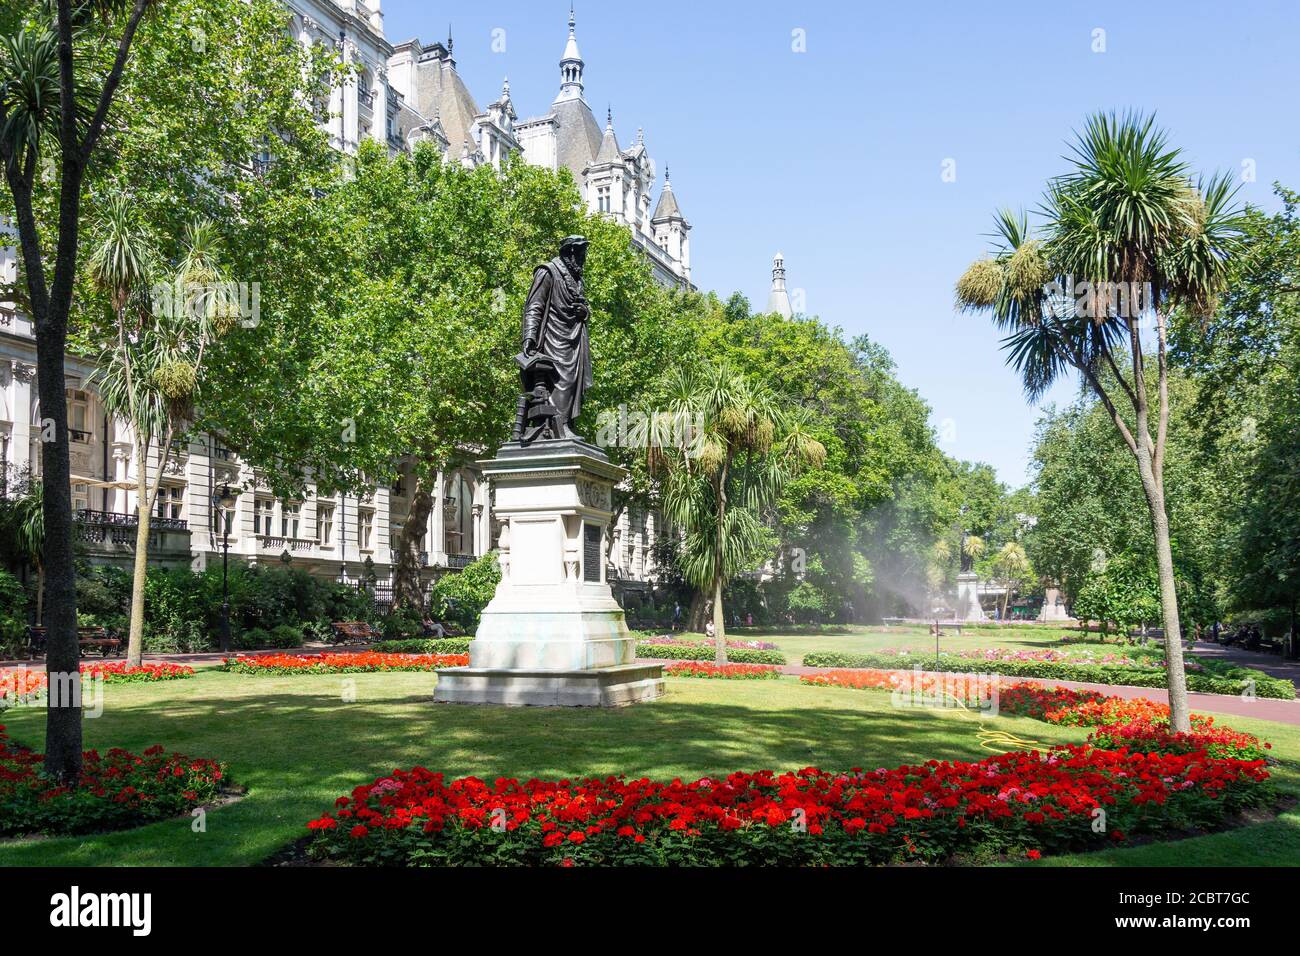 Whitehall Gardens, Victoria Embankment, City of Westminster, Greater London, England, Regno Unito Foto Stock